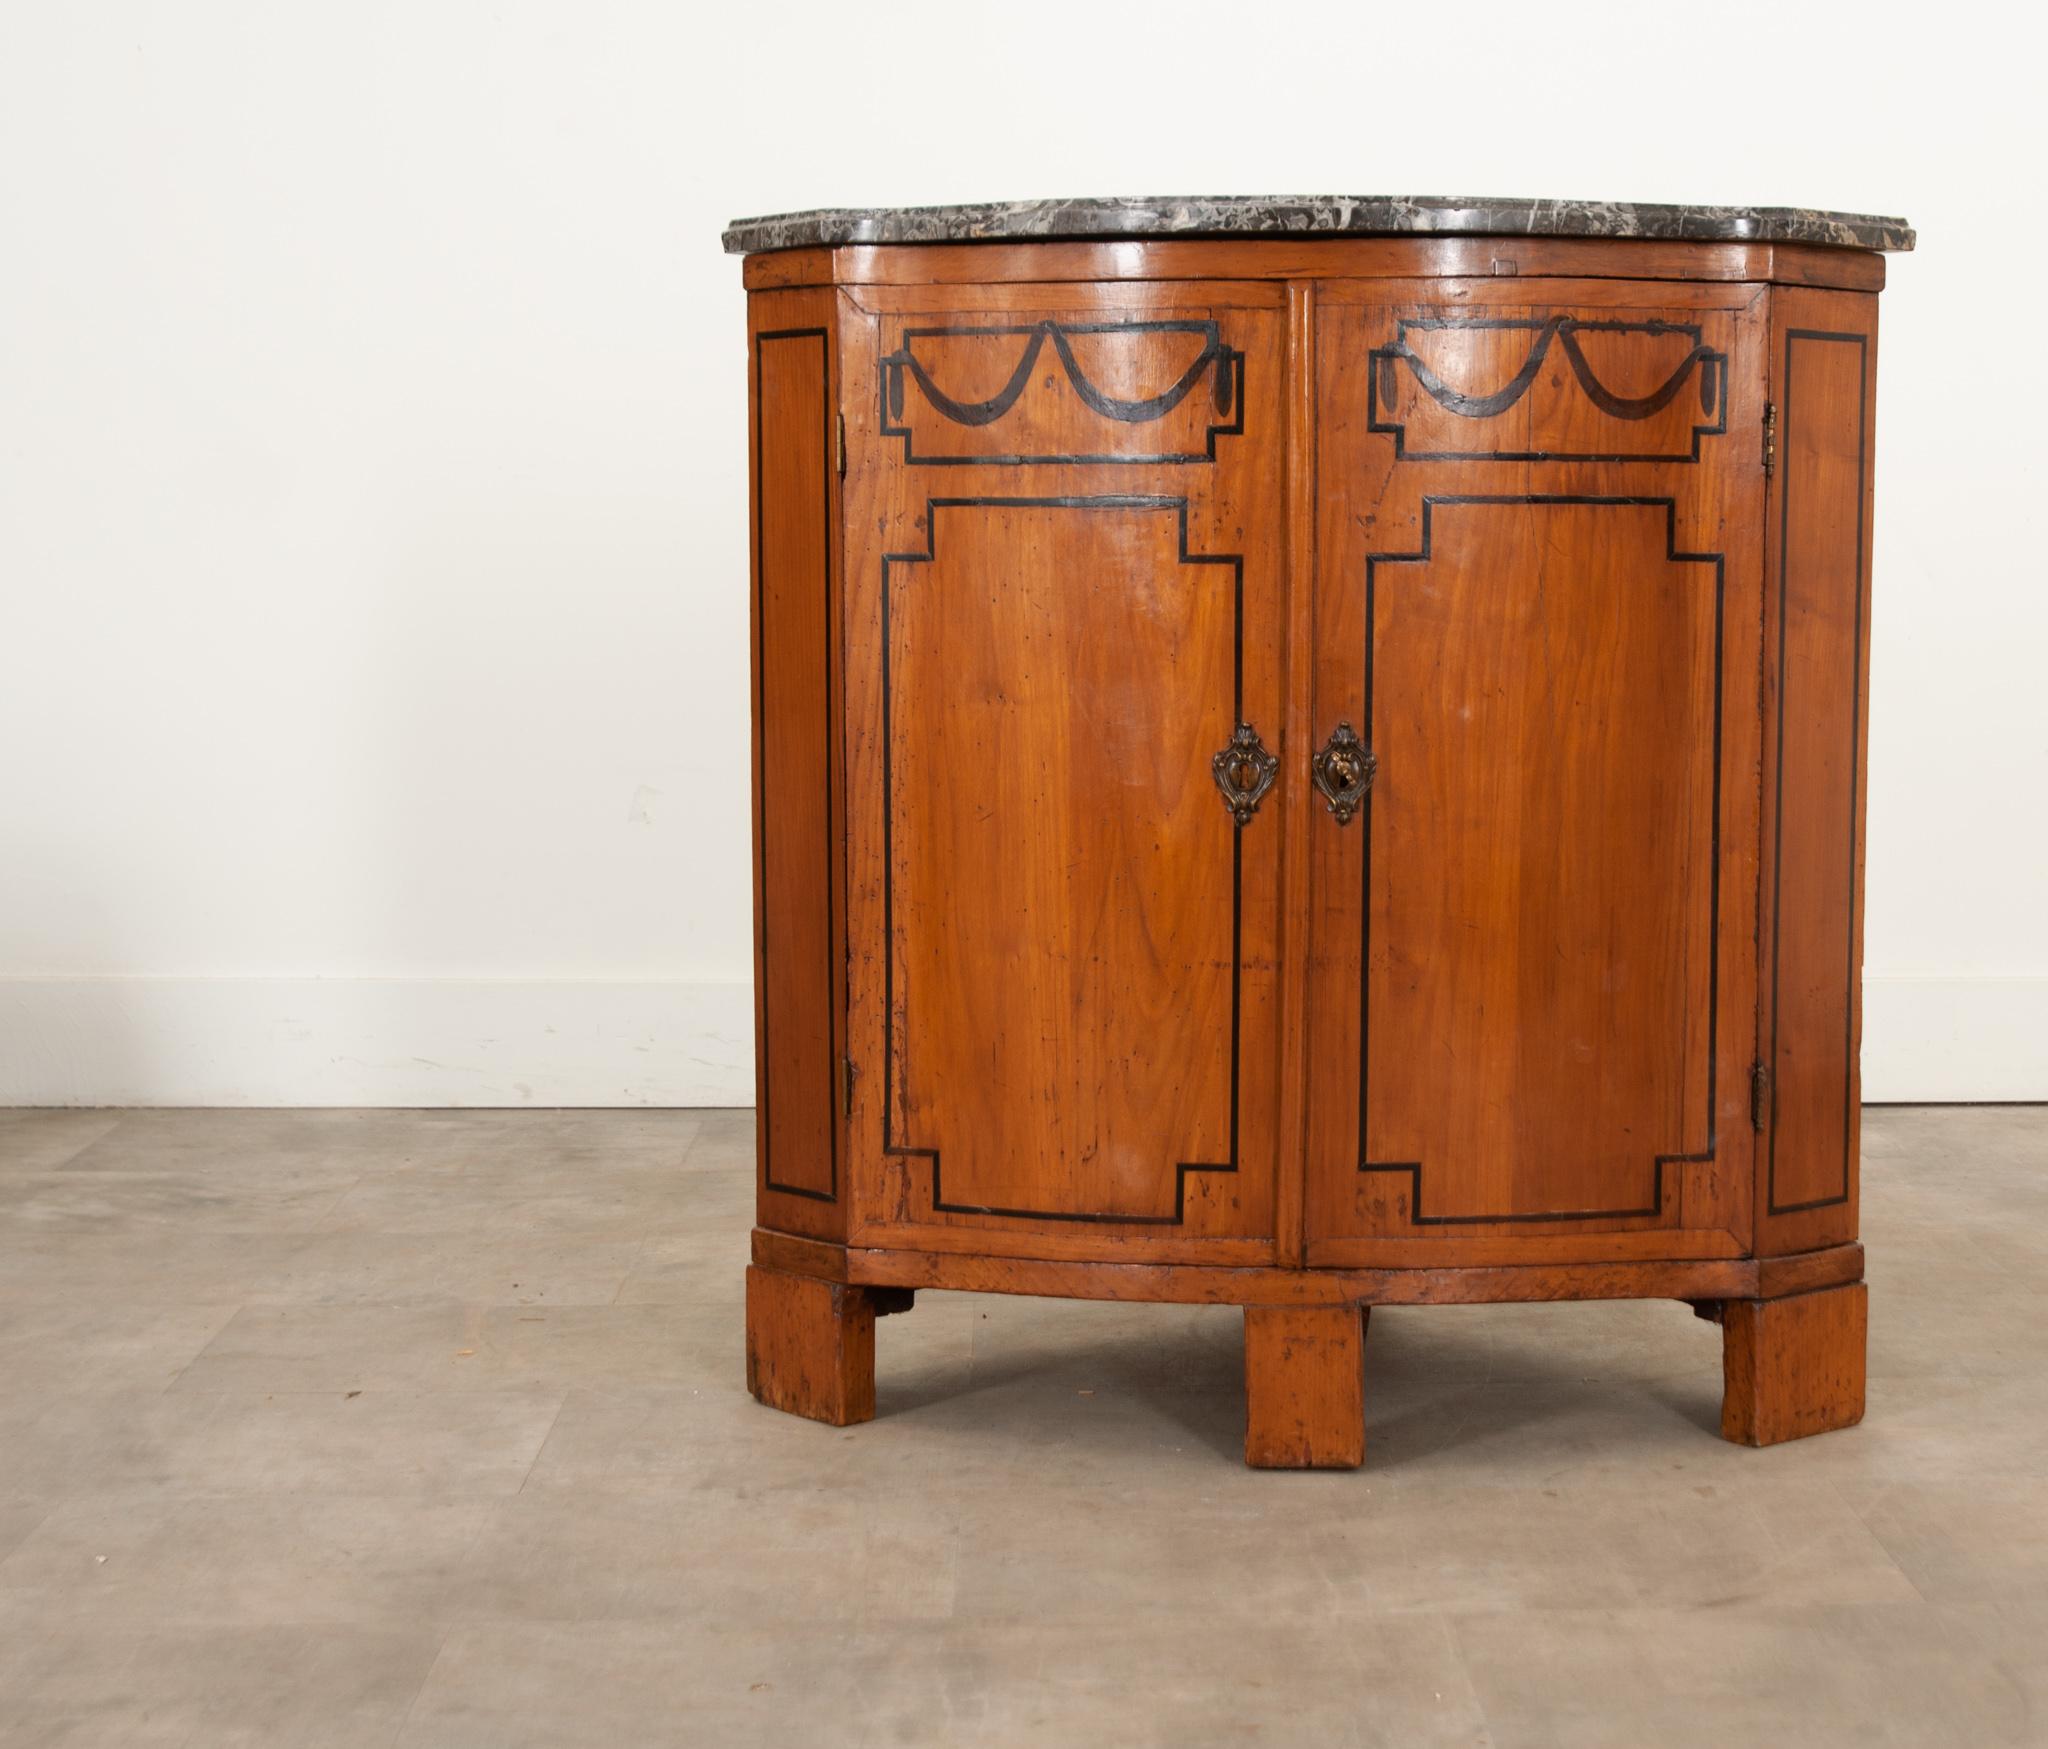 A French solid fruitwood corner cabinet that will add a bit more storage space without taking up too much room. Hand-crafted in the 19th century around 1850, this is a wonderful find with decorative ebony inlay trim and its original shaped marble